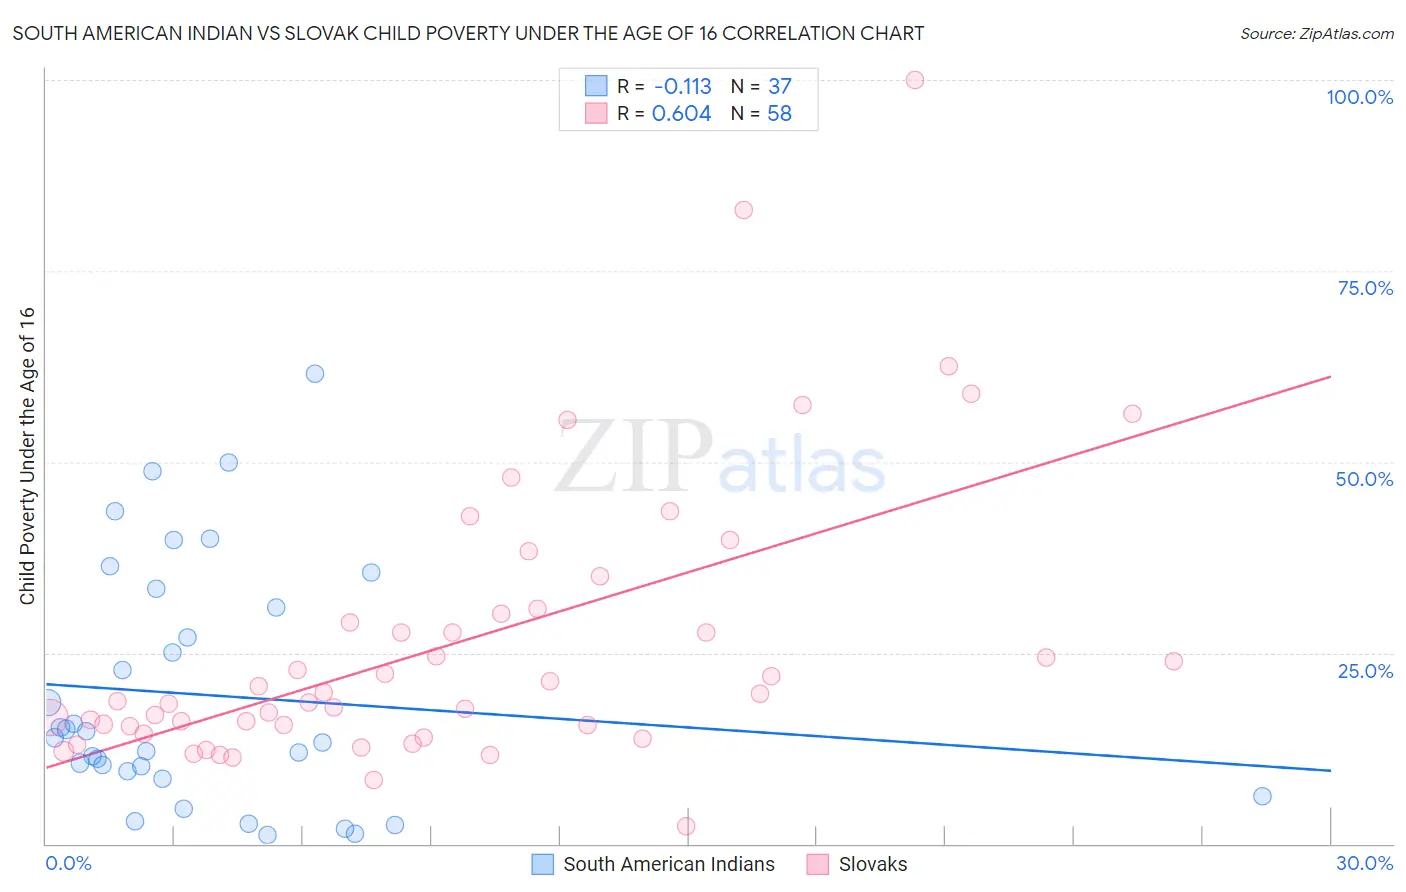 South American Indian vs Slovak Child Poverty Under the Age of 16